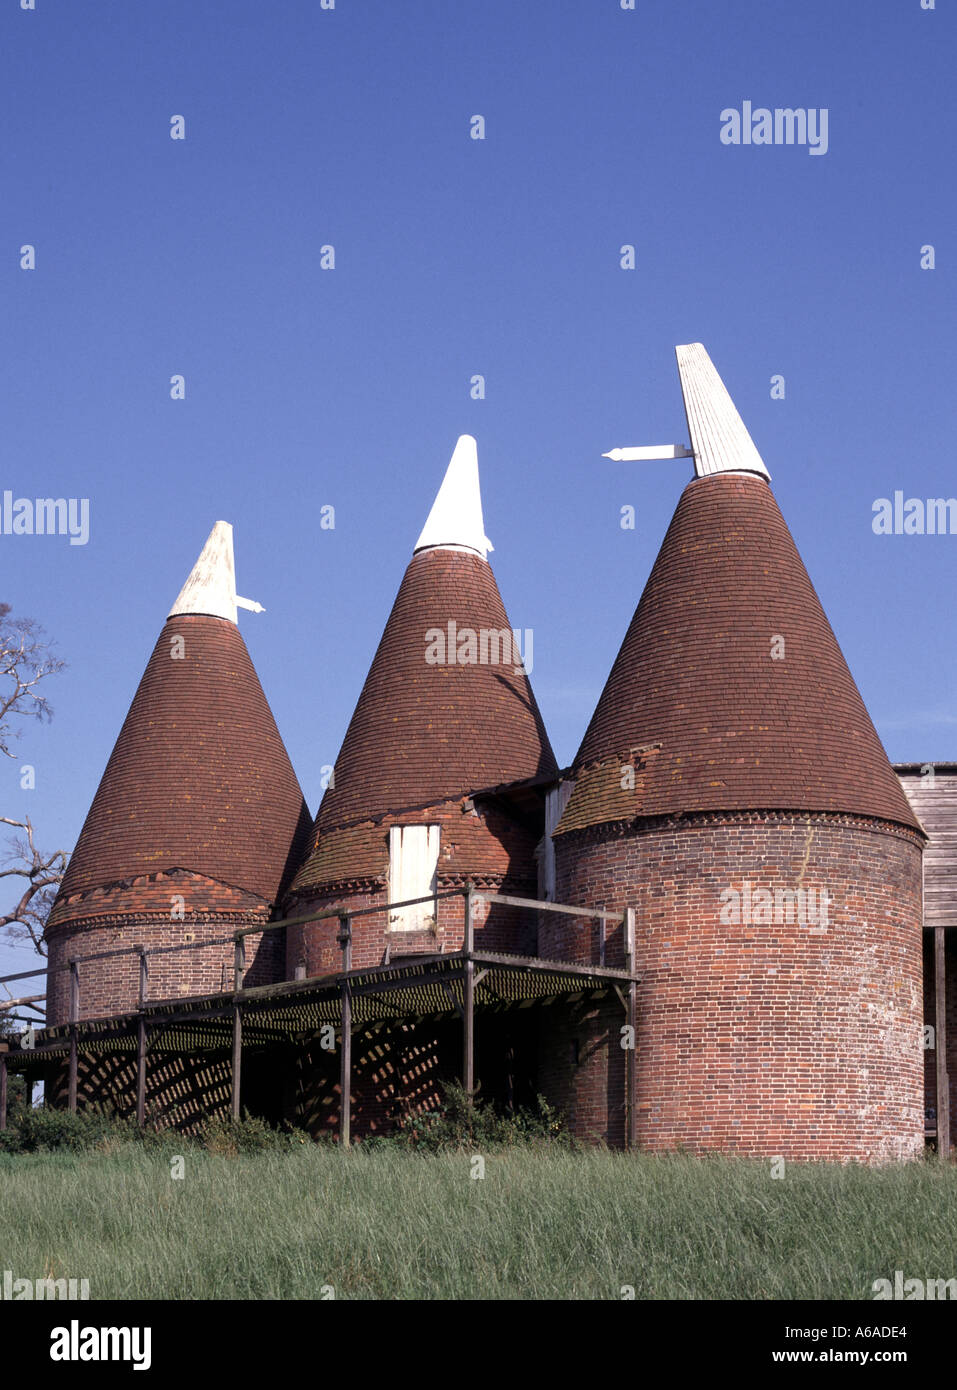 Oast house vernacular architecture kiln drying hops in beer brewing process nostalgic heritage feature of history in changing Kent & English landscape Stock Photo